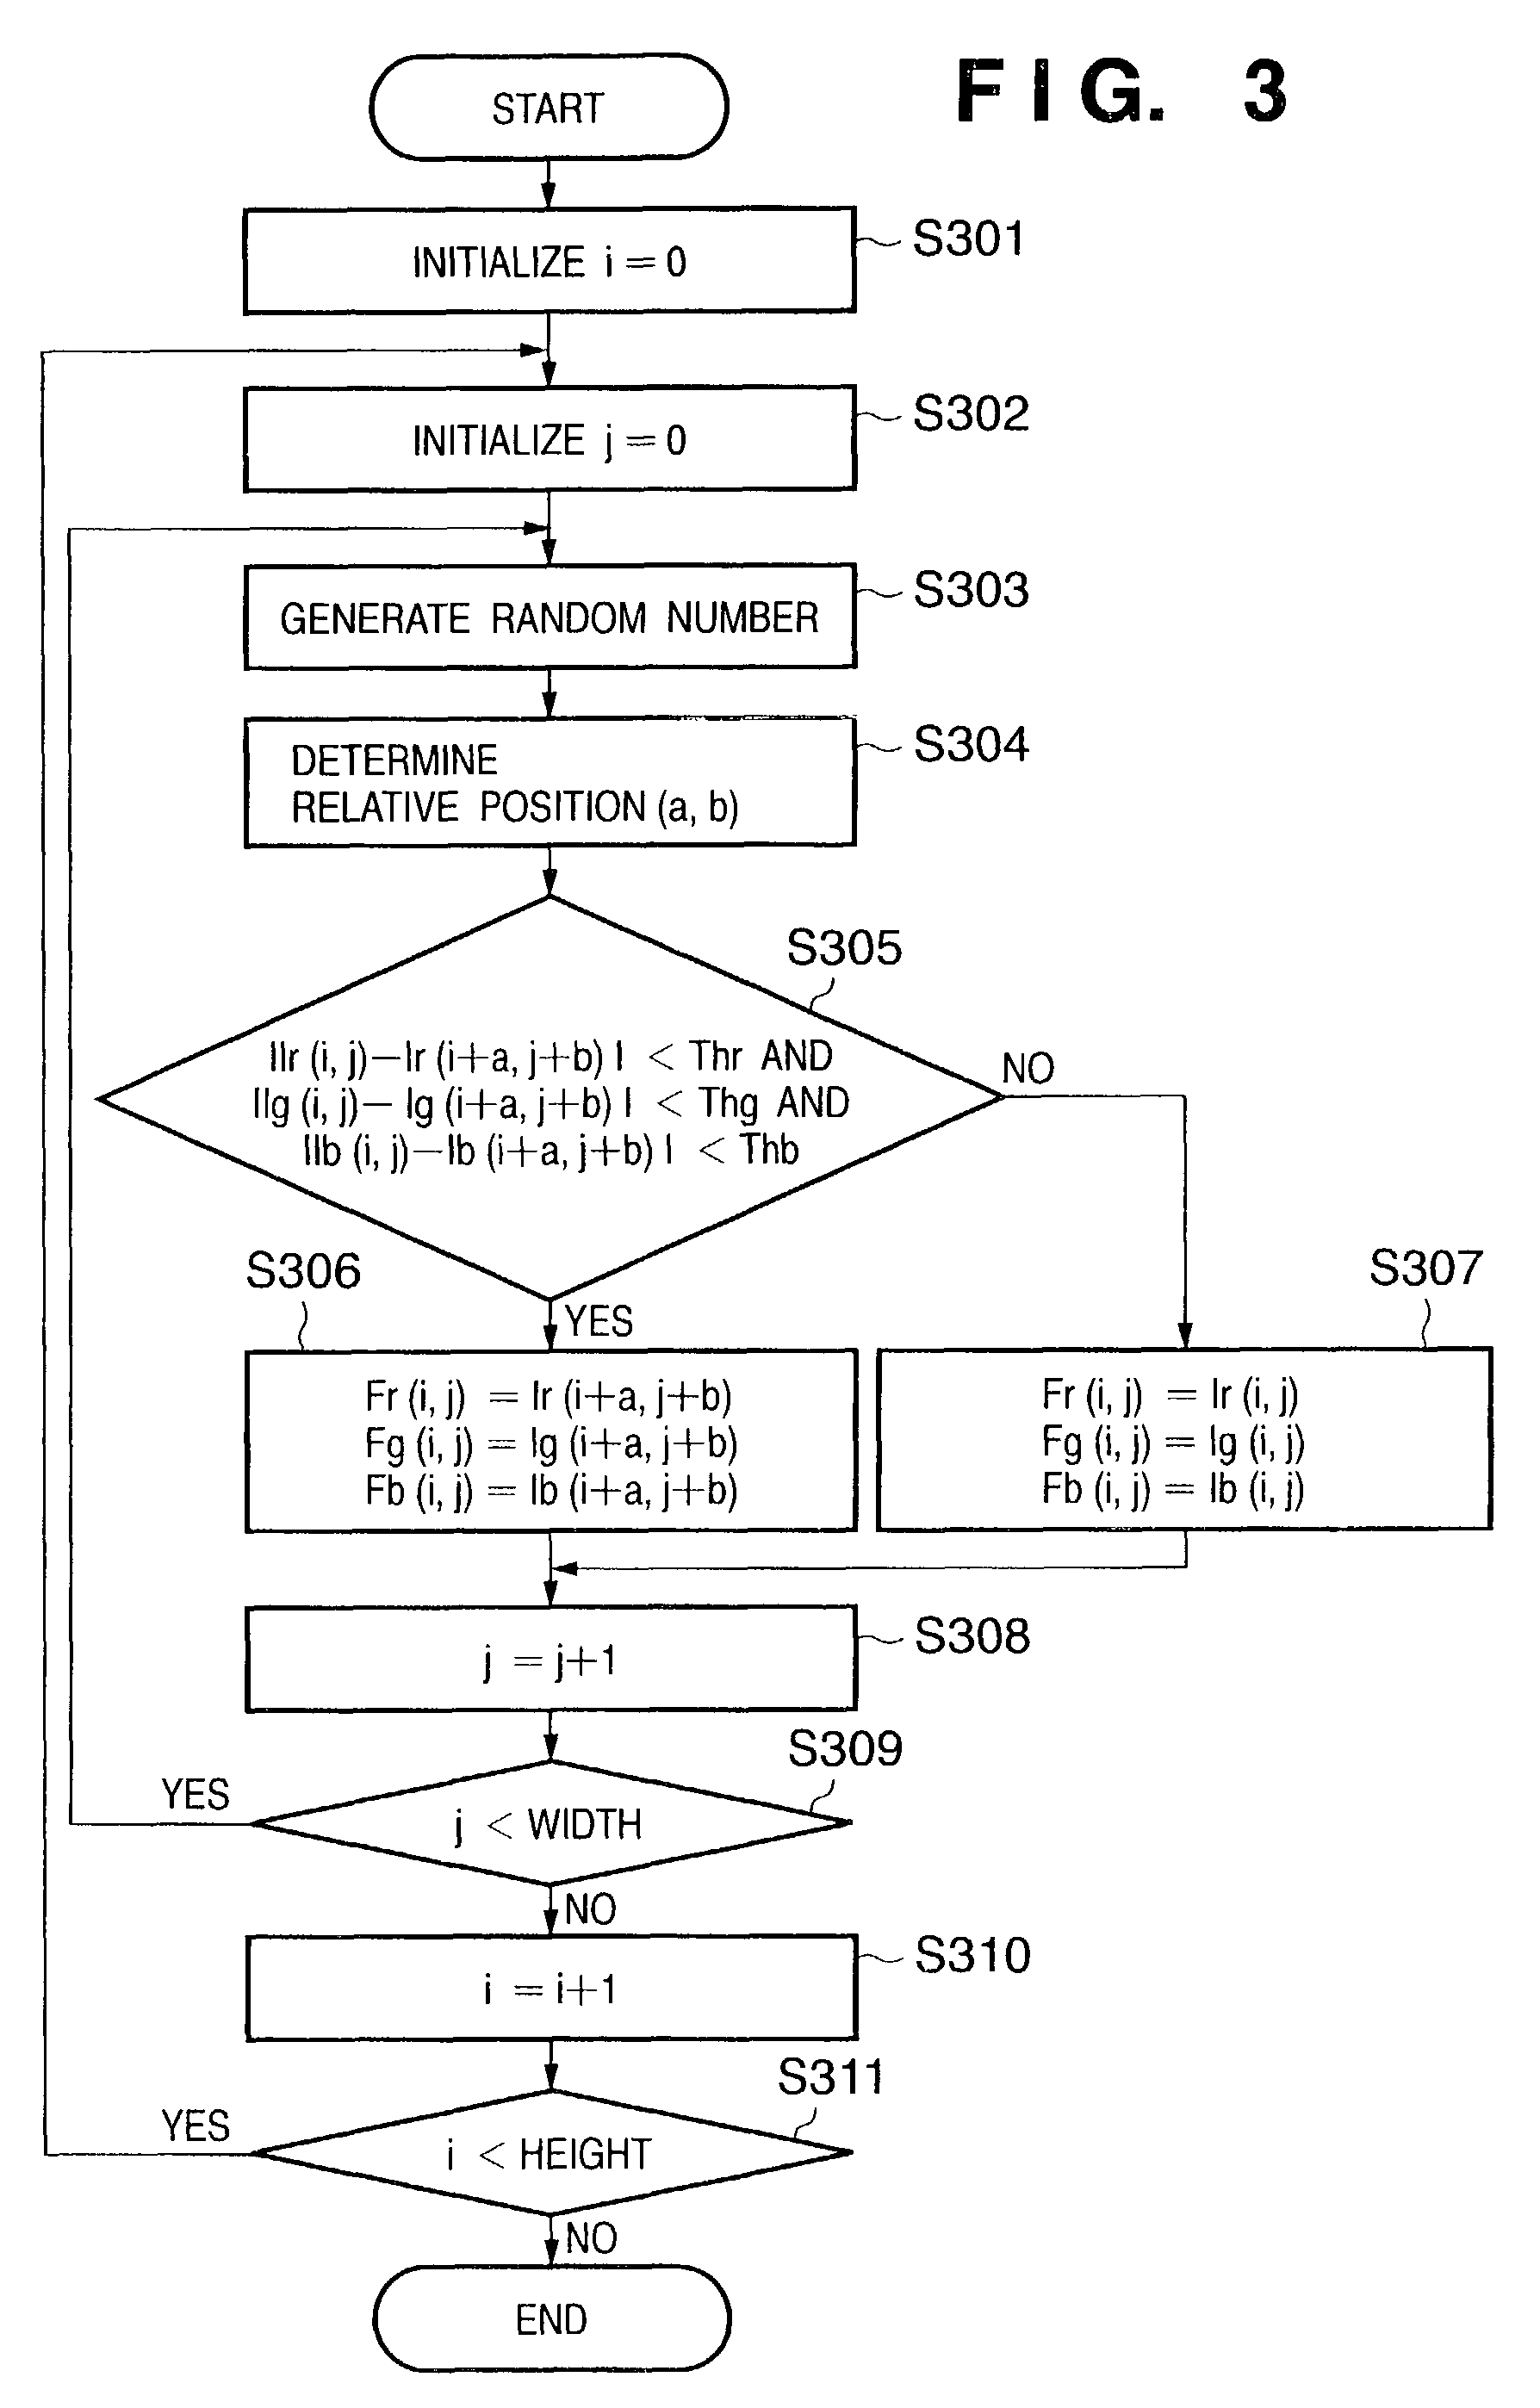 Image processing apparatus, image processing method, and a program, for removing low-frequency noise from image data